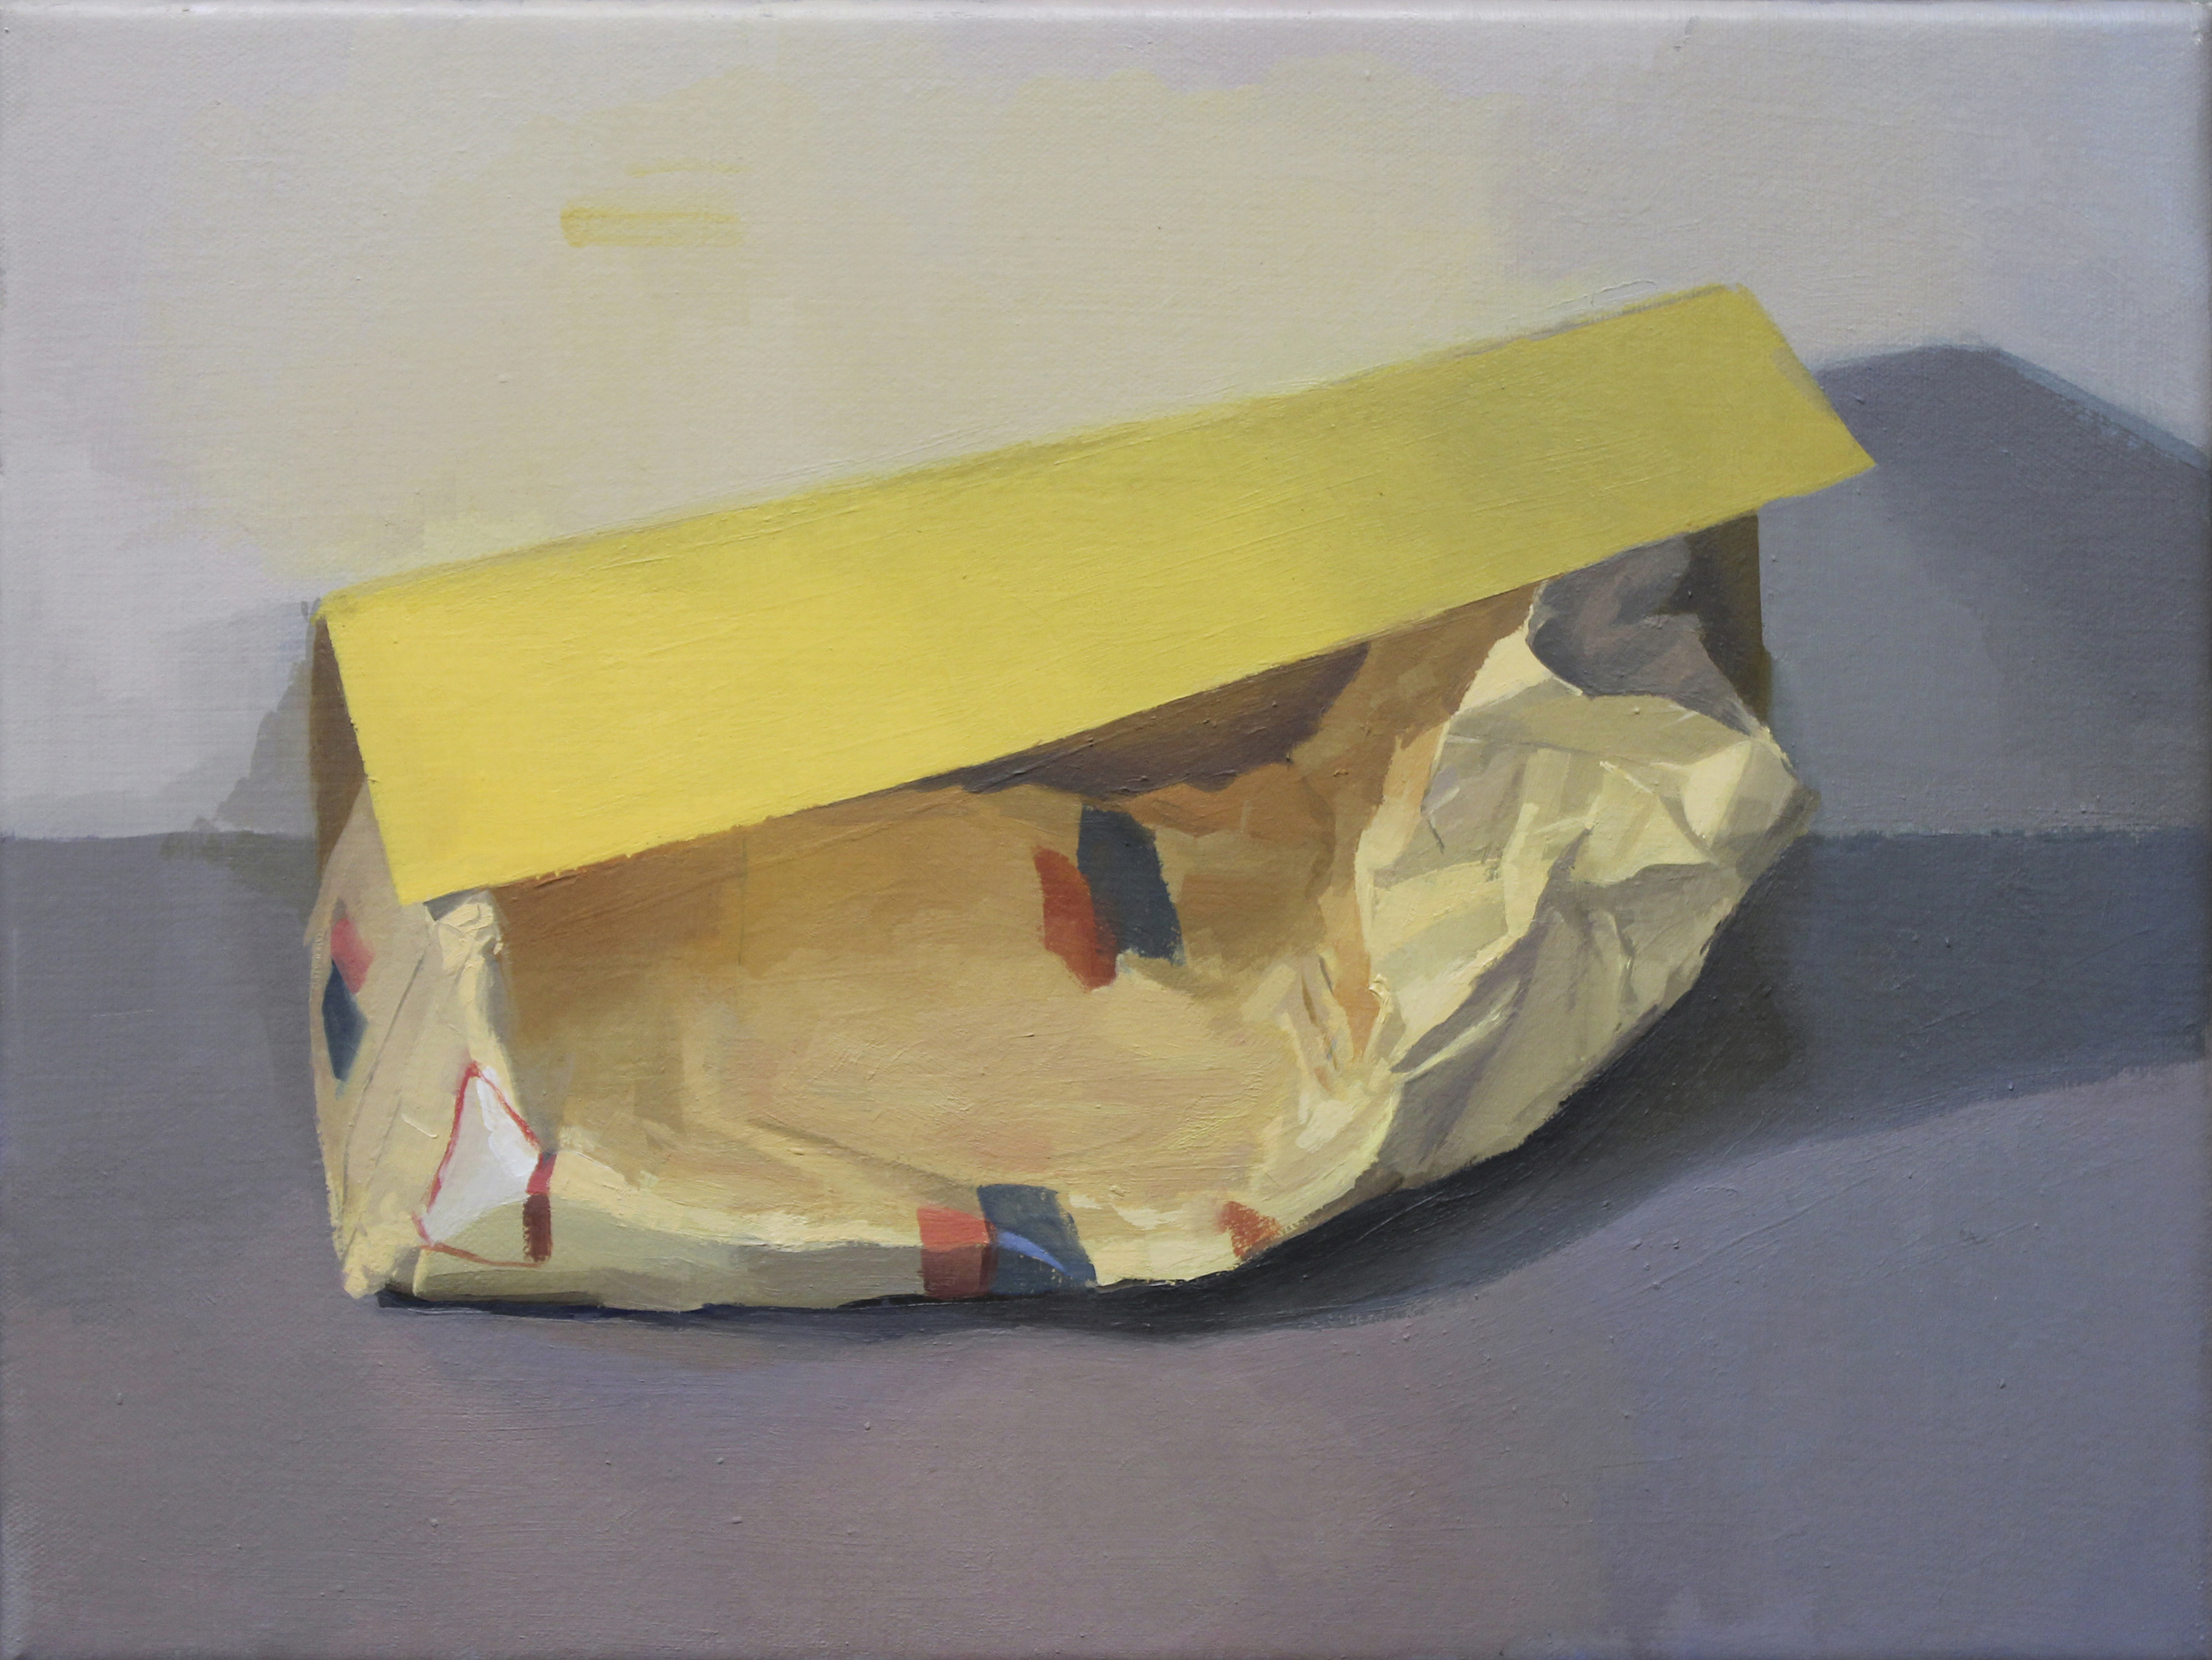    yellow bag yellow paper     oil on canvas 12x16" 2012  private collection 